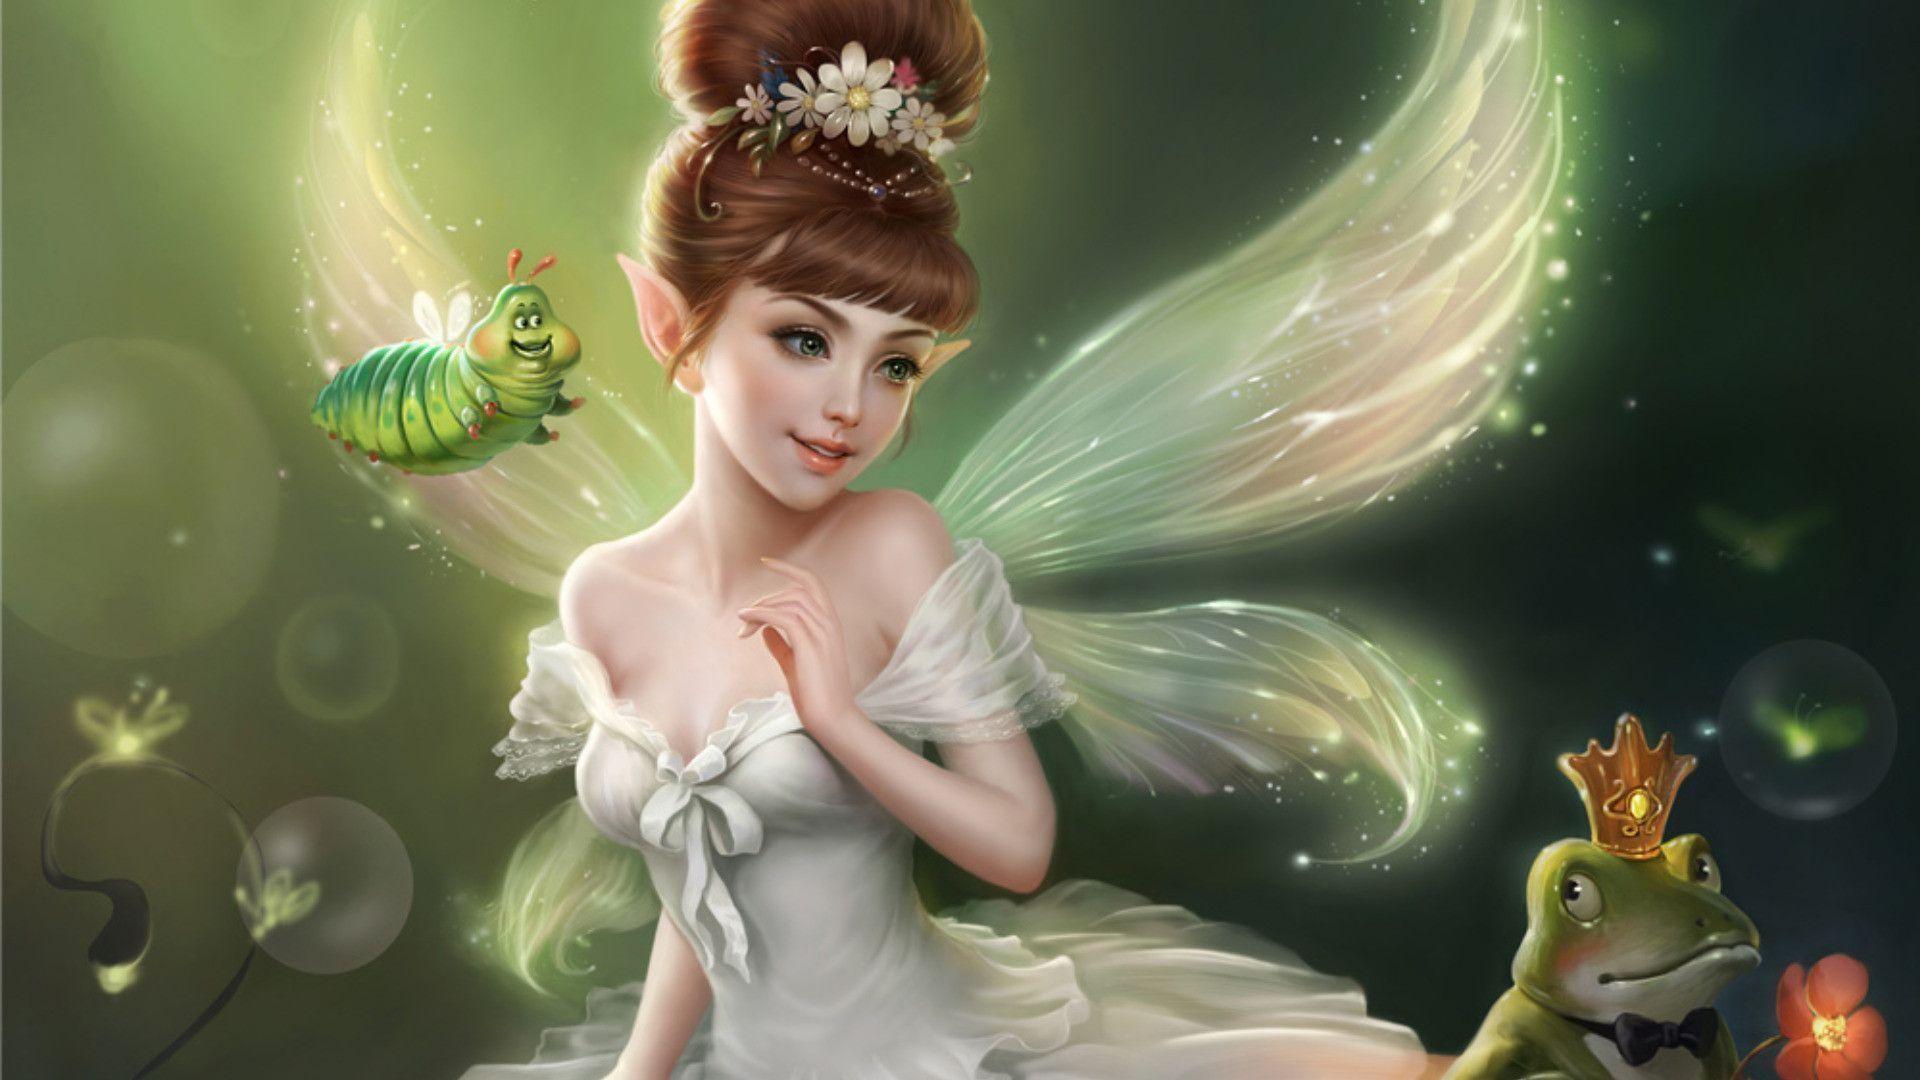 1920x1080 The Fairy and that Frog Prince Computer Wallpapers, Desktop .